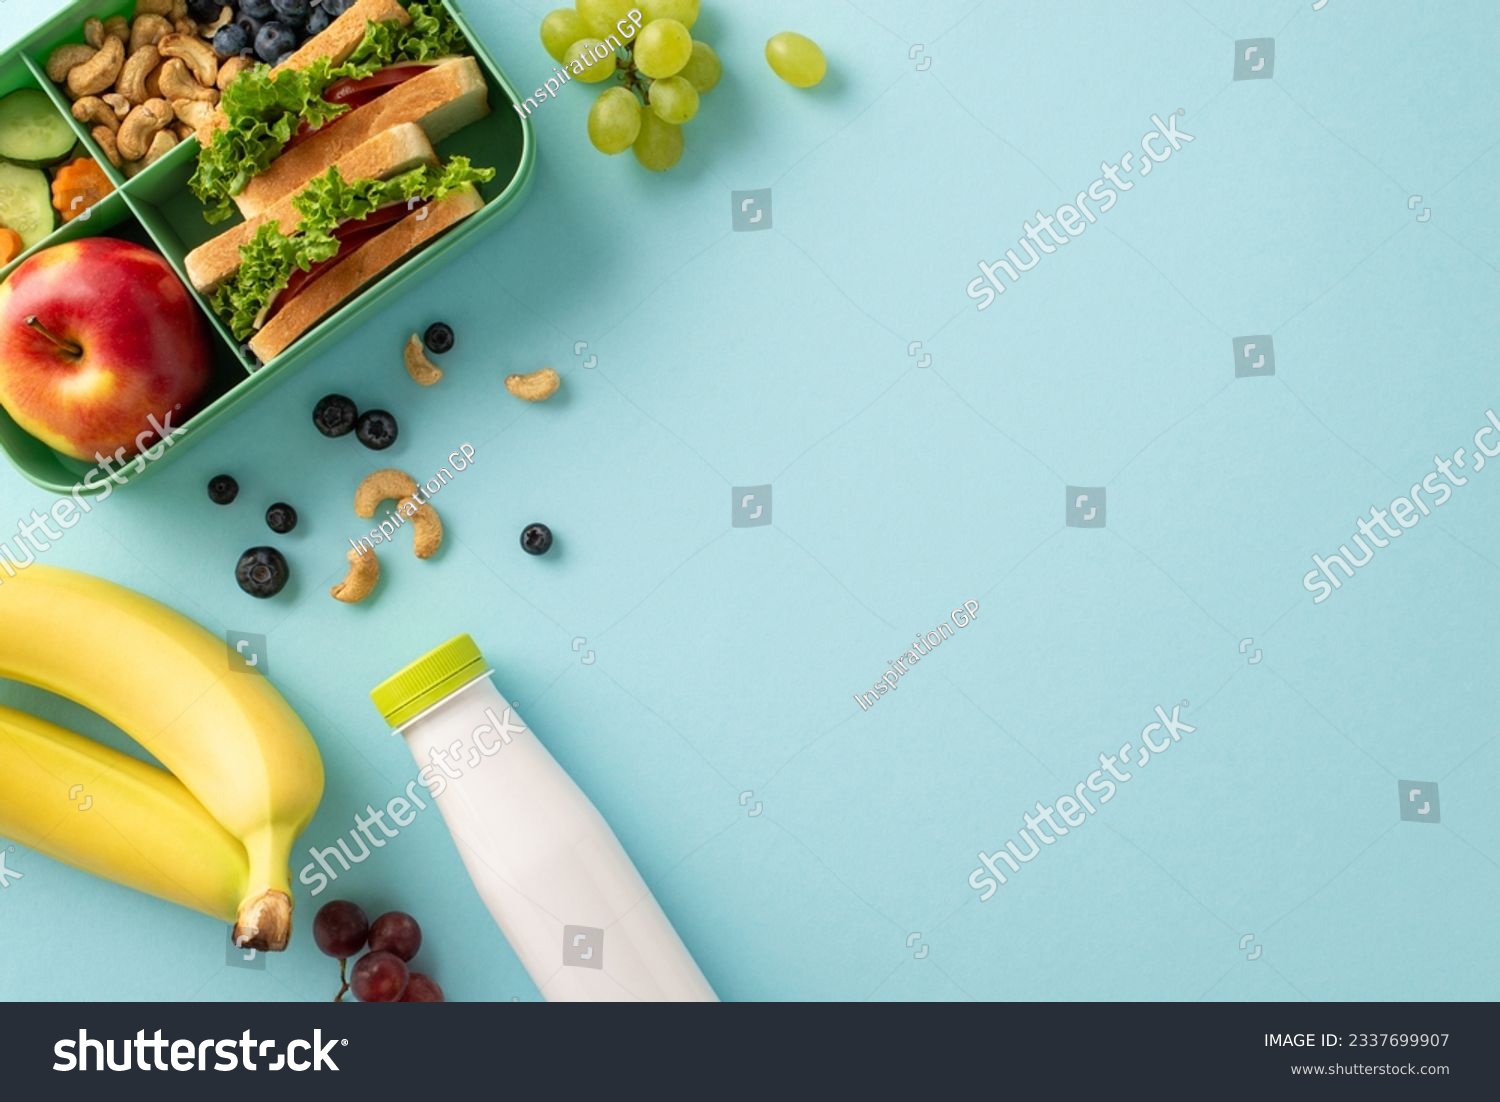 Wholesome lunchtime concept portrayed from a top-down view. The lunchbox holds nutritious sandwiches, fruits, buts and berries on blue isolated background, offering copyspace for text or promotions #2337699907